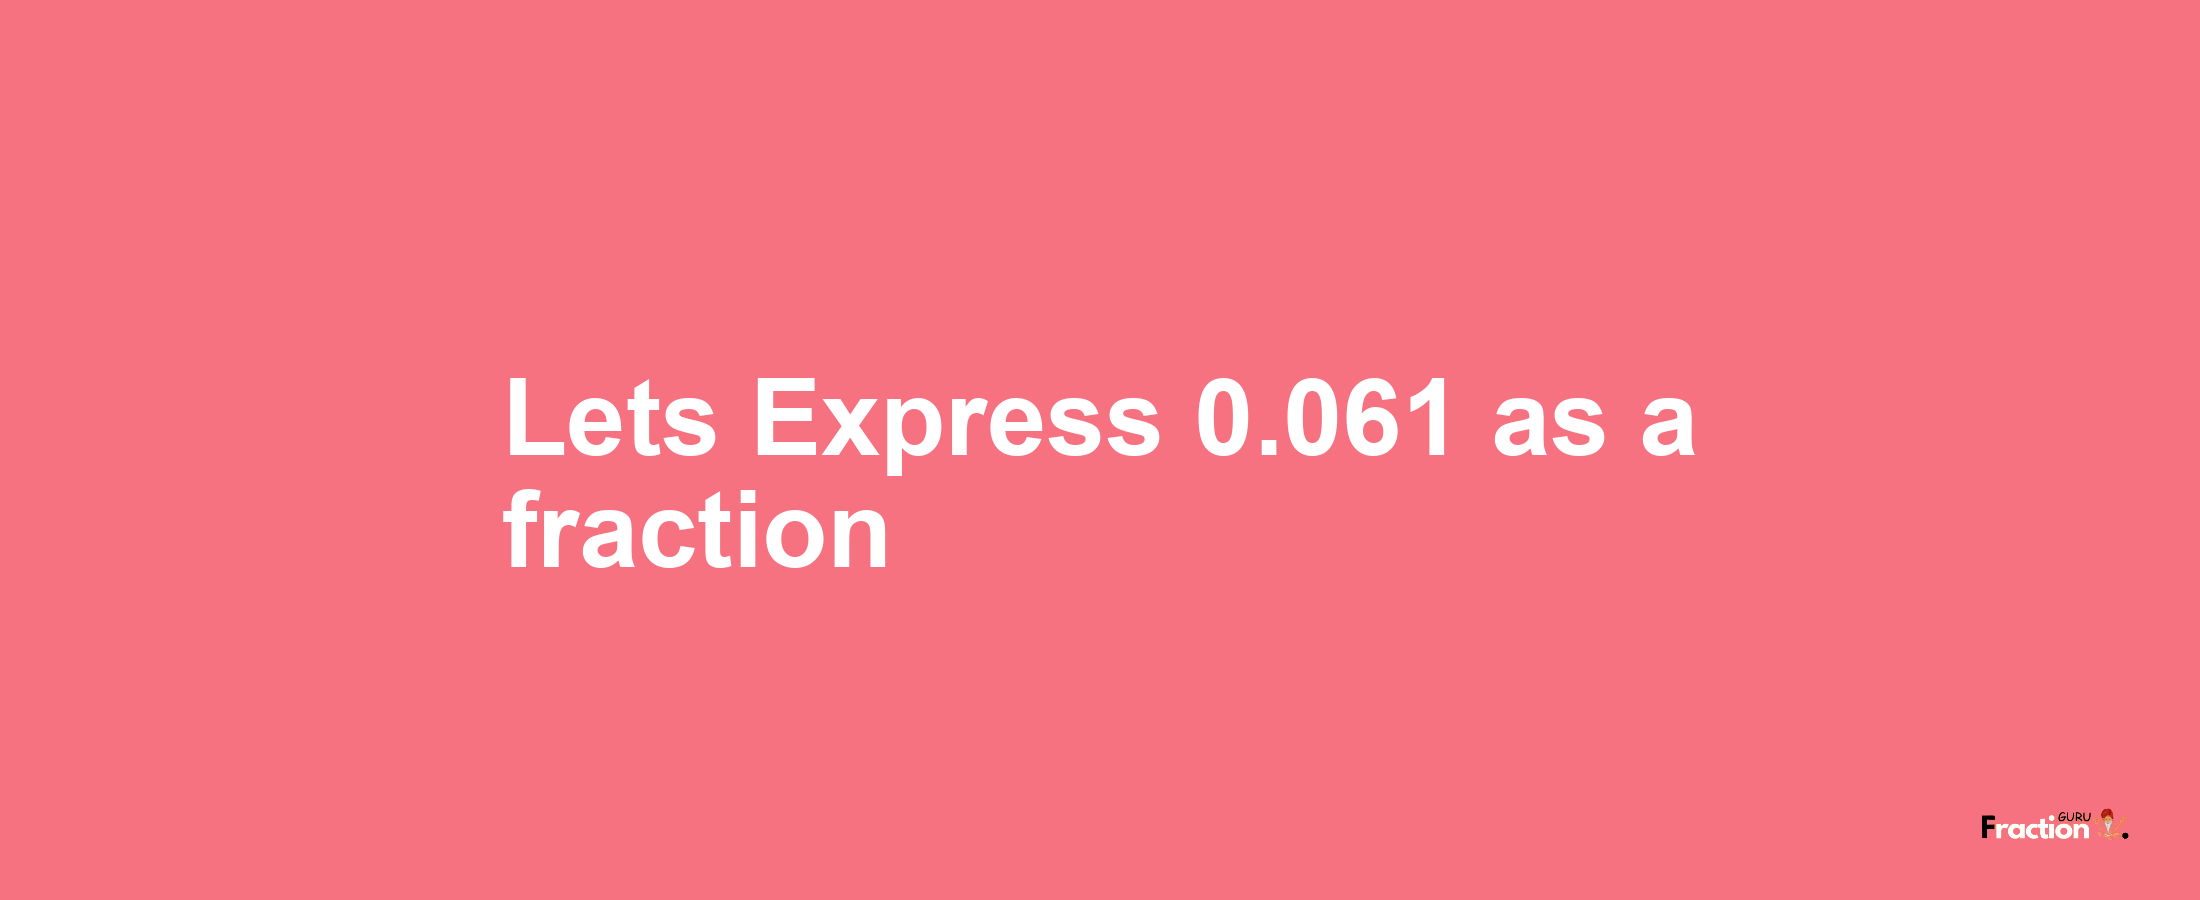 Lets Express 0.061 as afraction